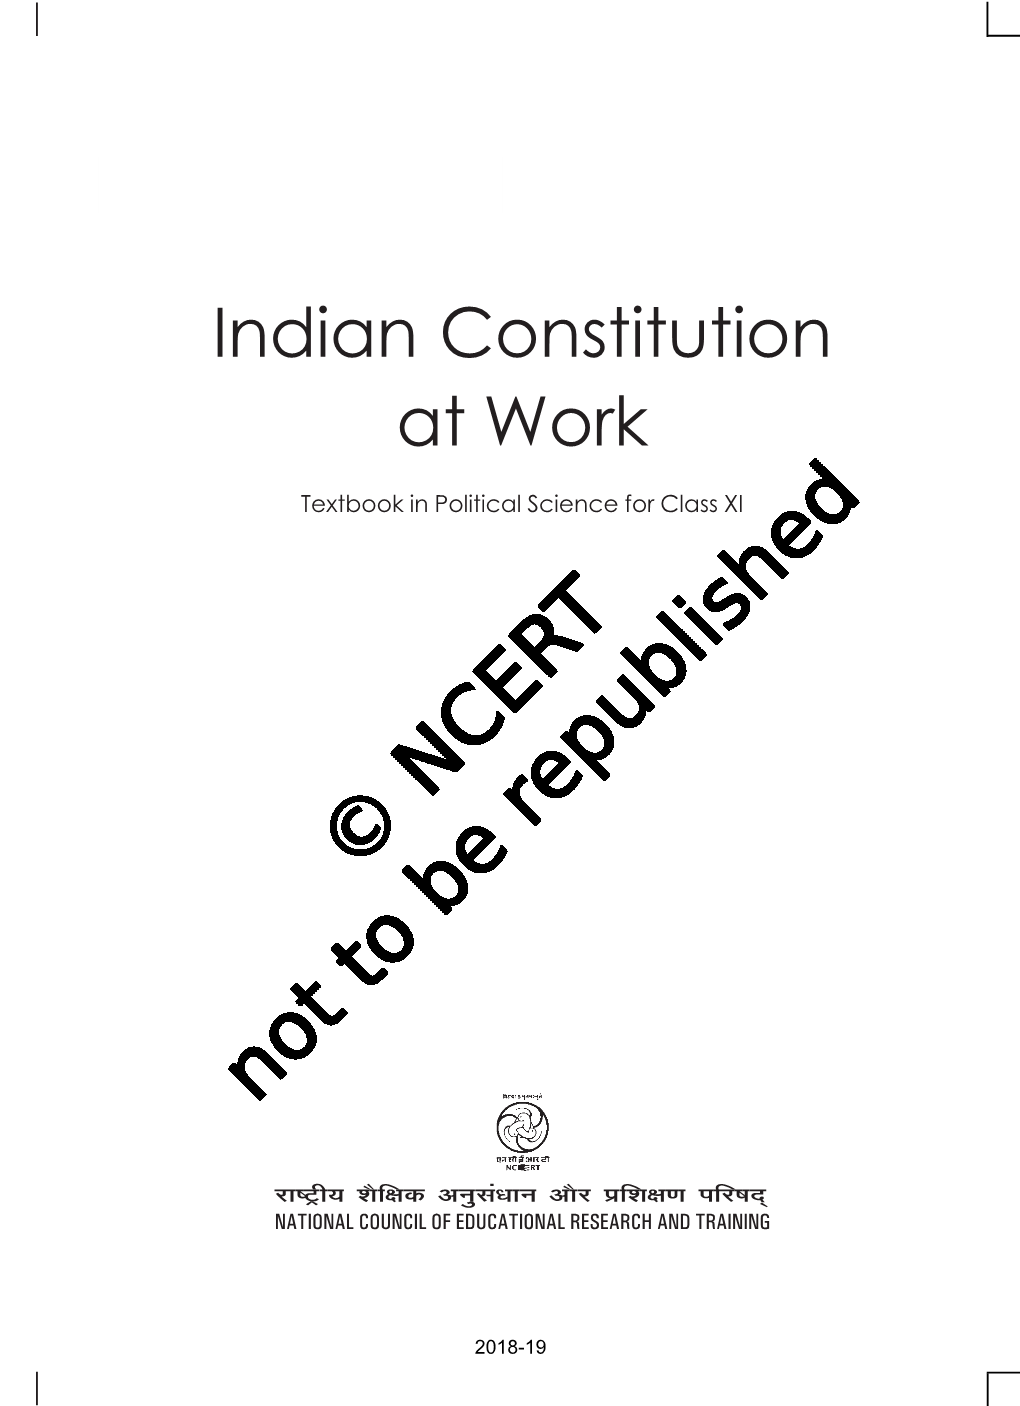 Indian Constitution at Work